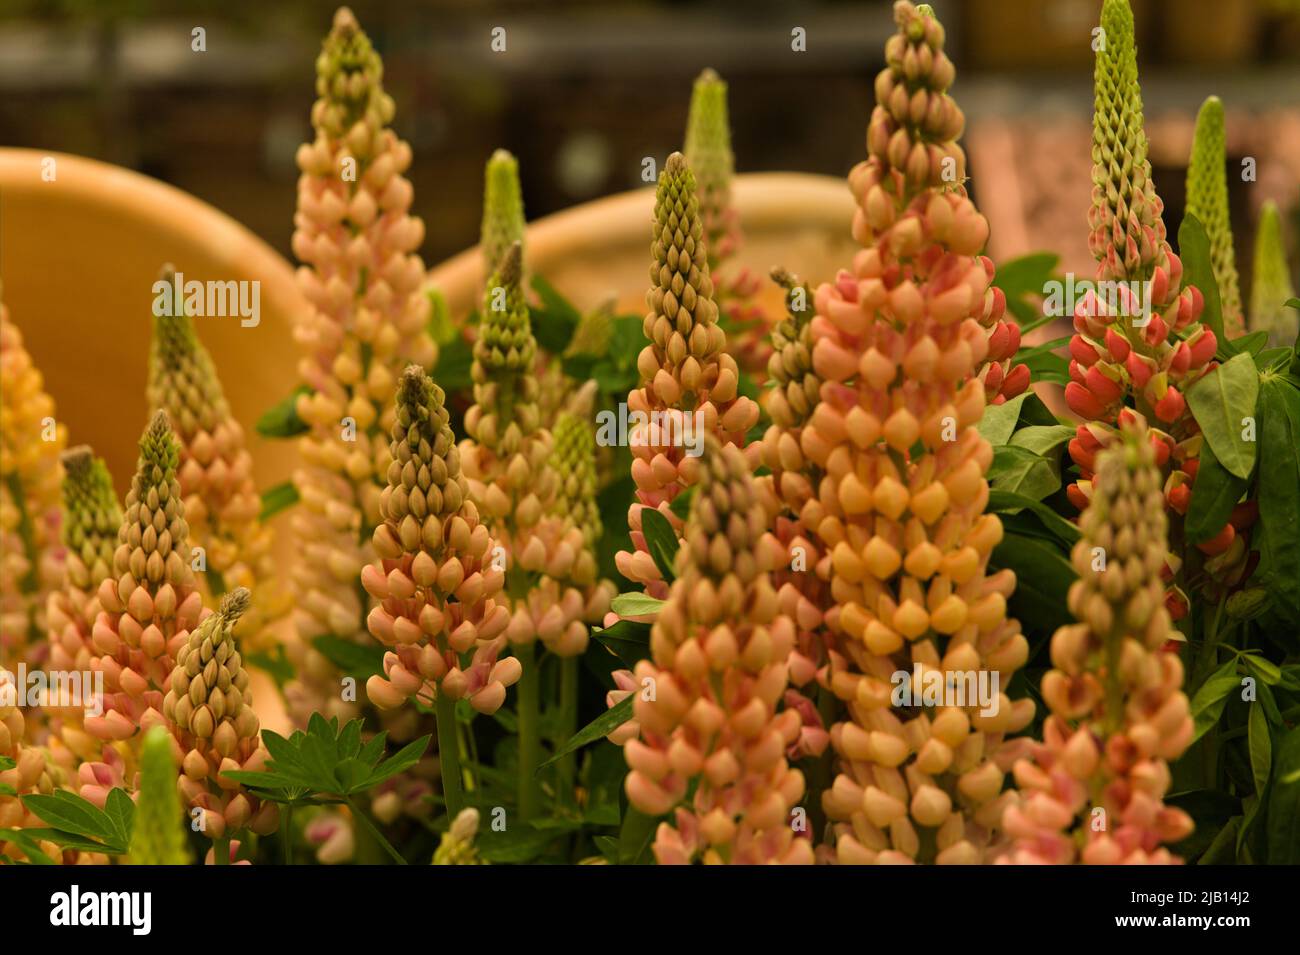 Colourful Spires of Pale Tangerine Lupin Flowers with terracota pots in background Stock Photo